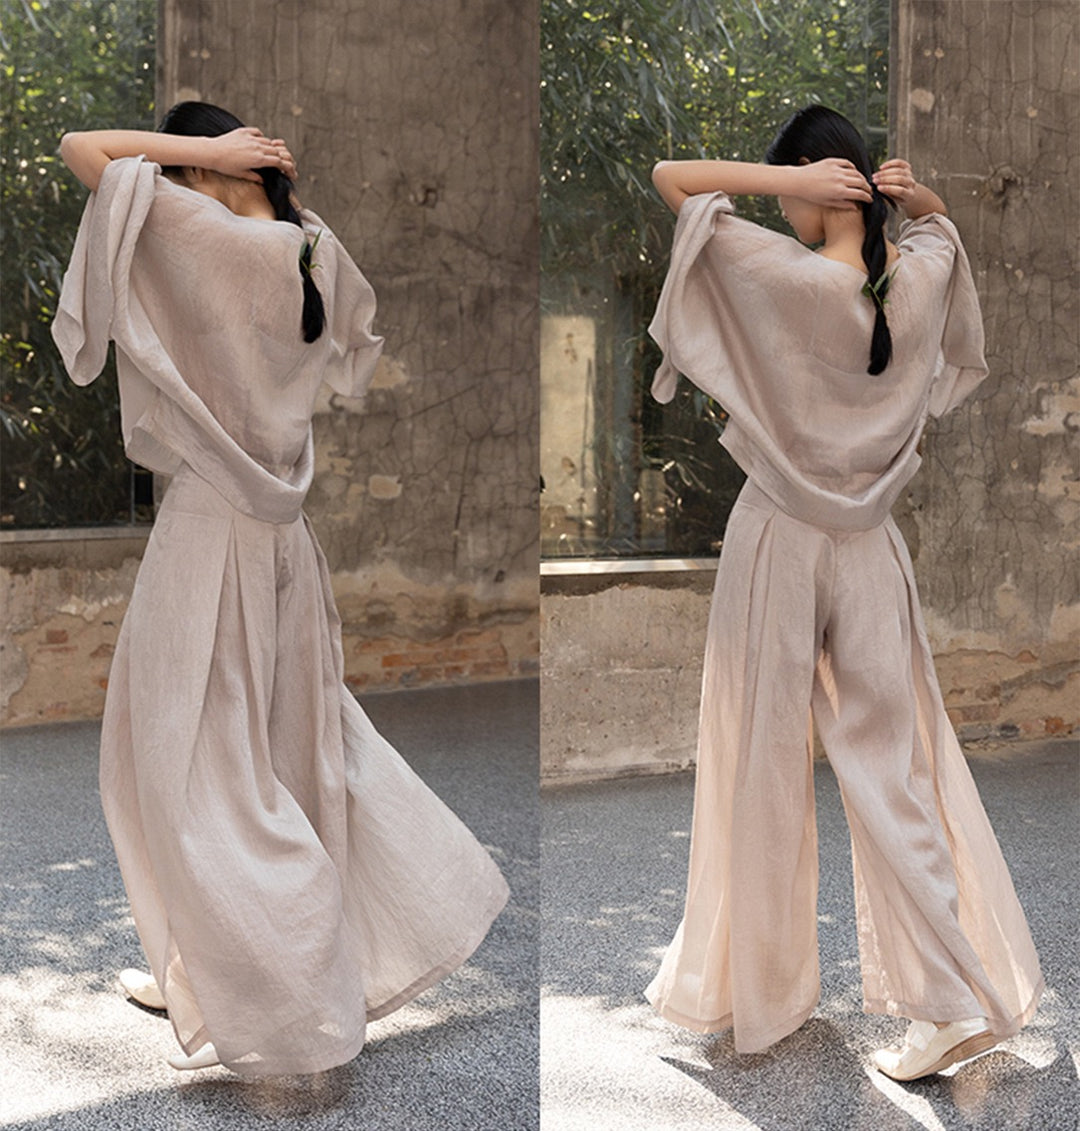 The Dao 道 of Zen Champagne Flow Suit • Elegant Water Sleeves and Drape • Icy Satin • Recycled Materials • Flowy Qi, Breathable, Durable • Add top and pants for full energy flow suit